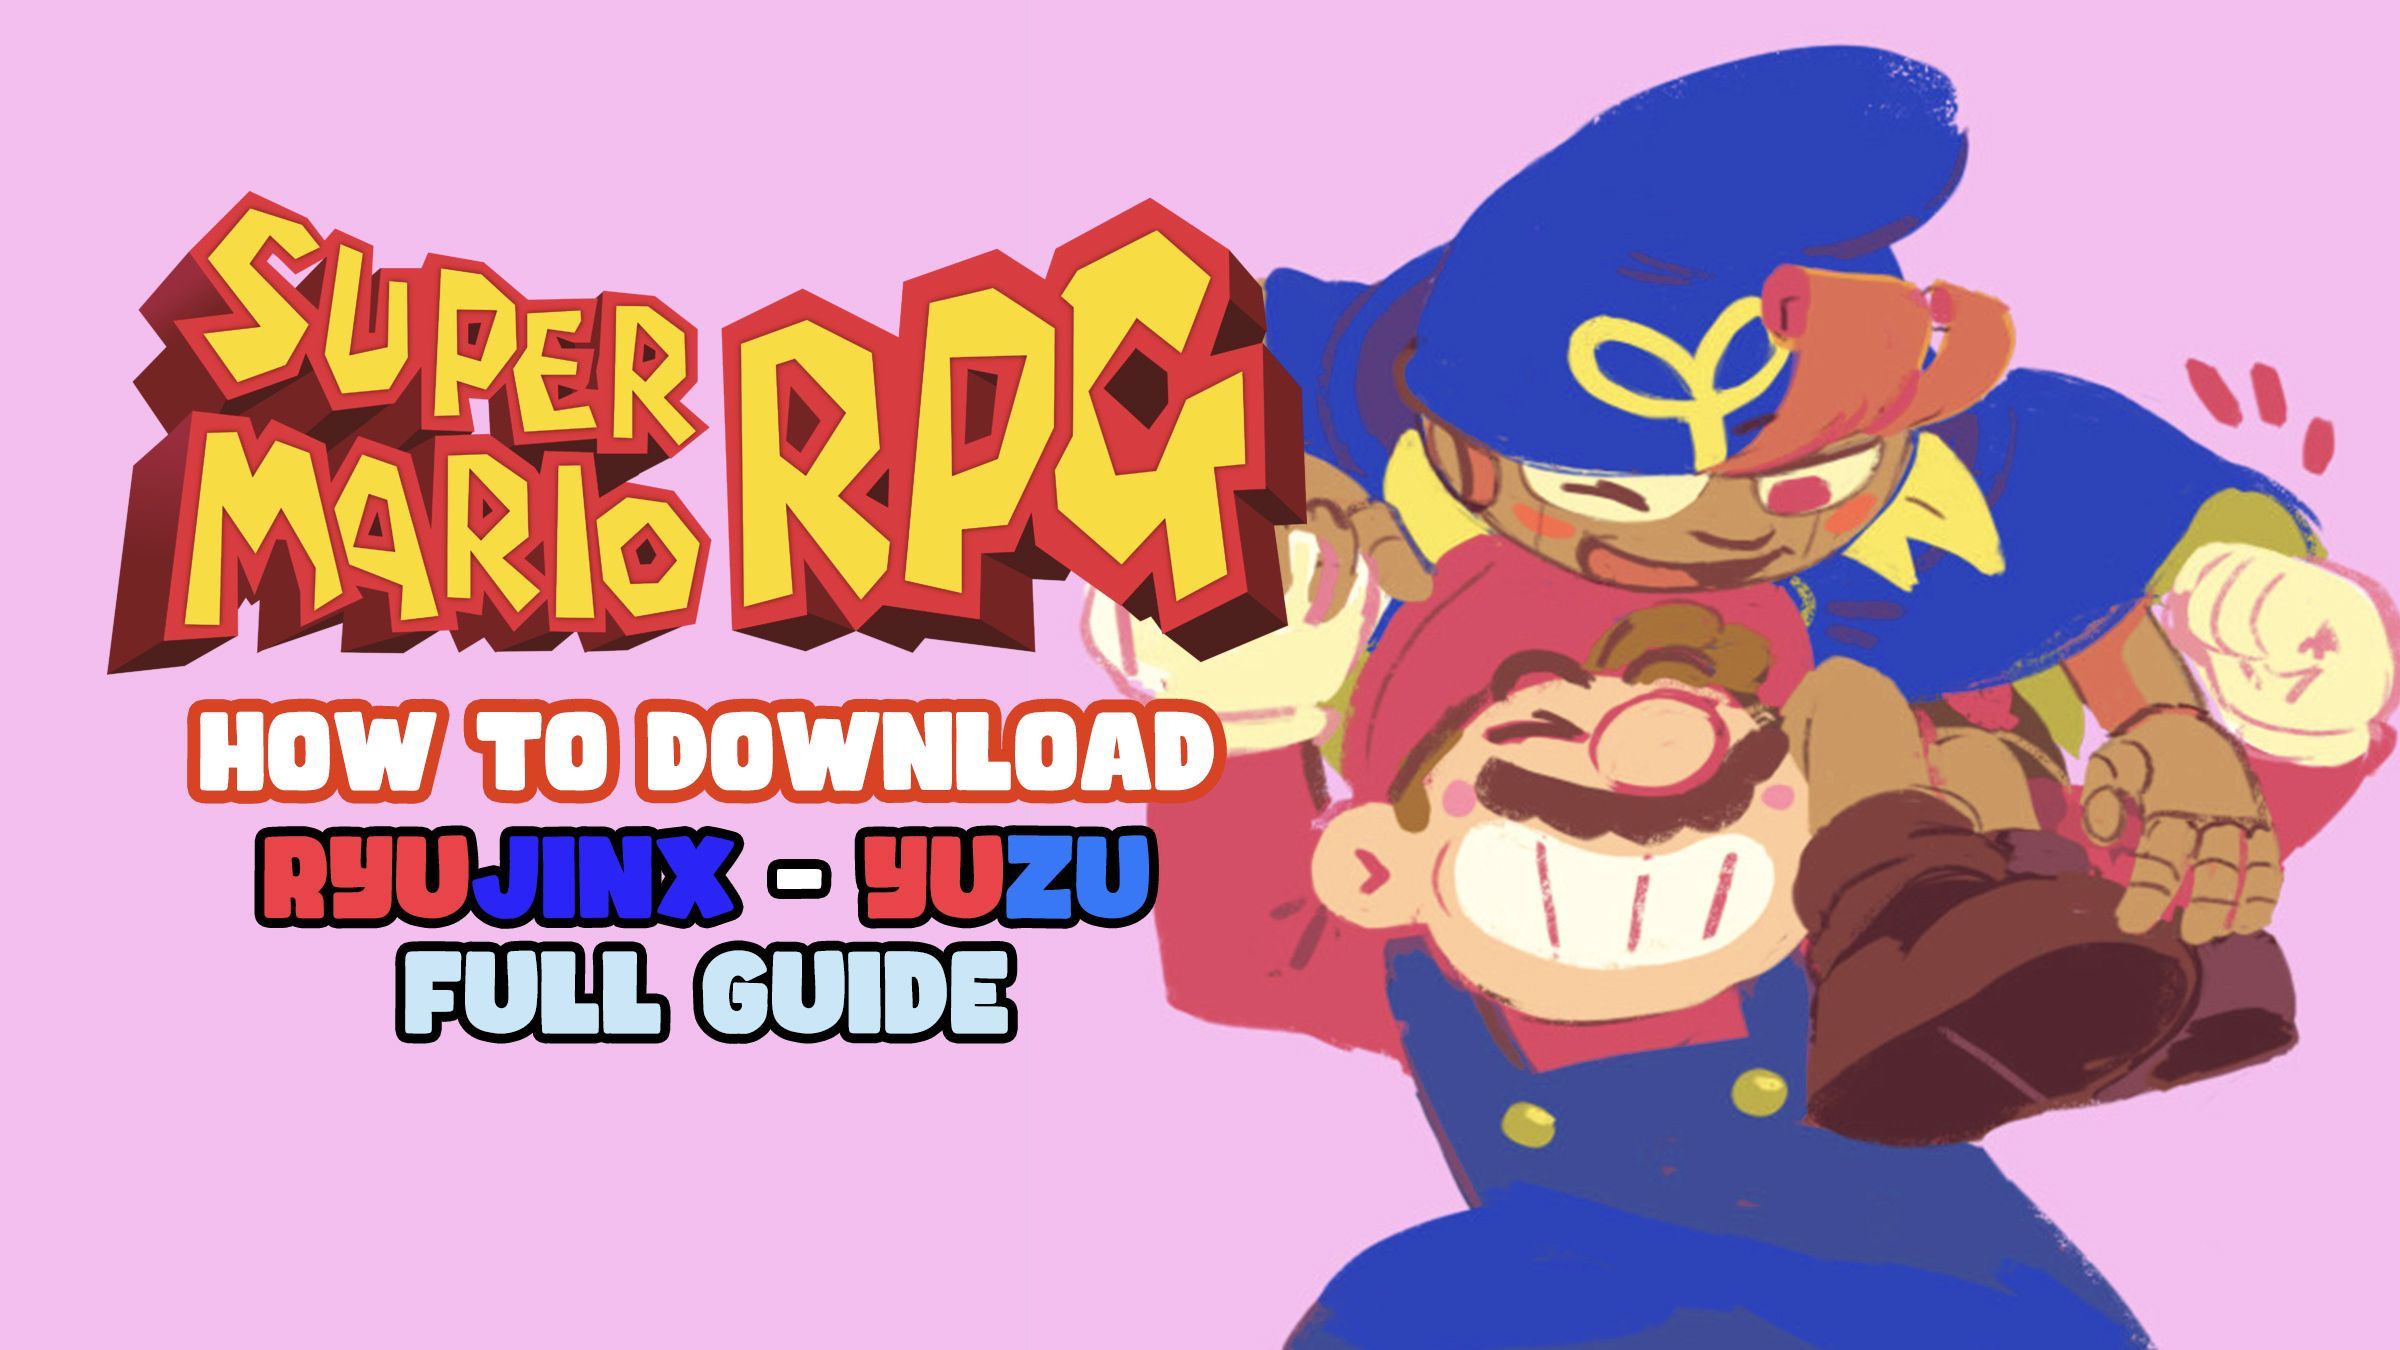 Super Mario RPG Leaks and is Already Being Played on PC Via Yuzu